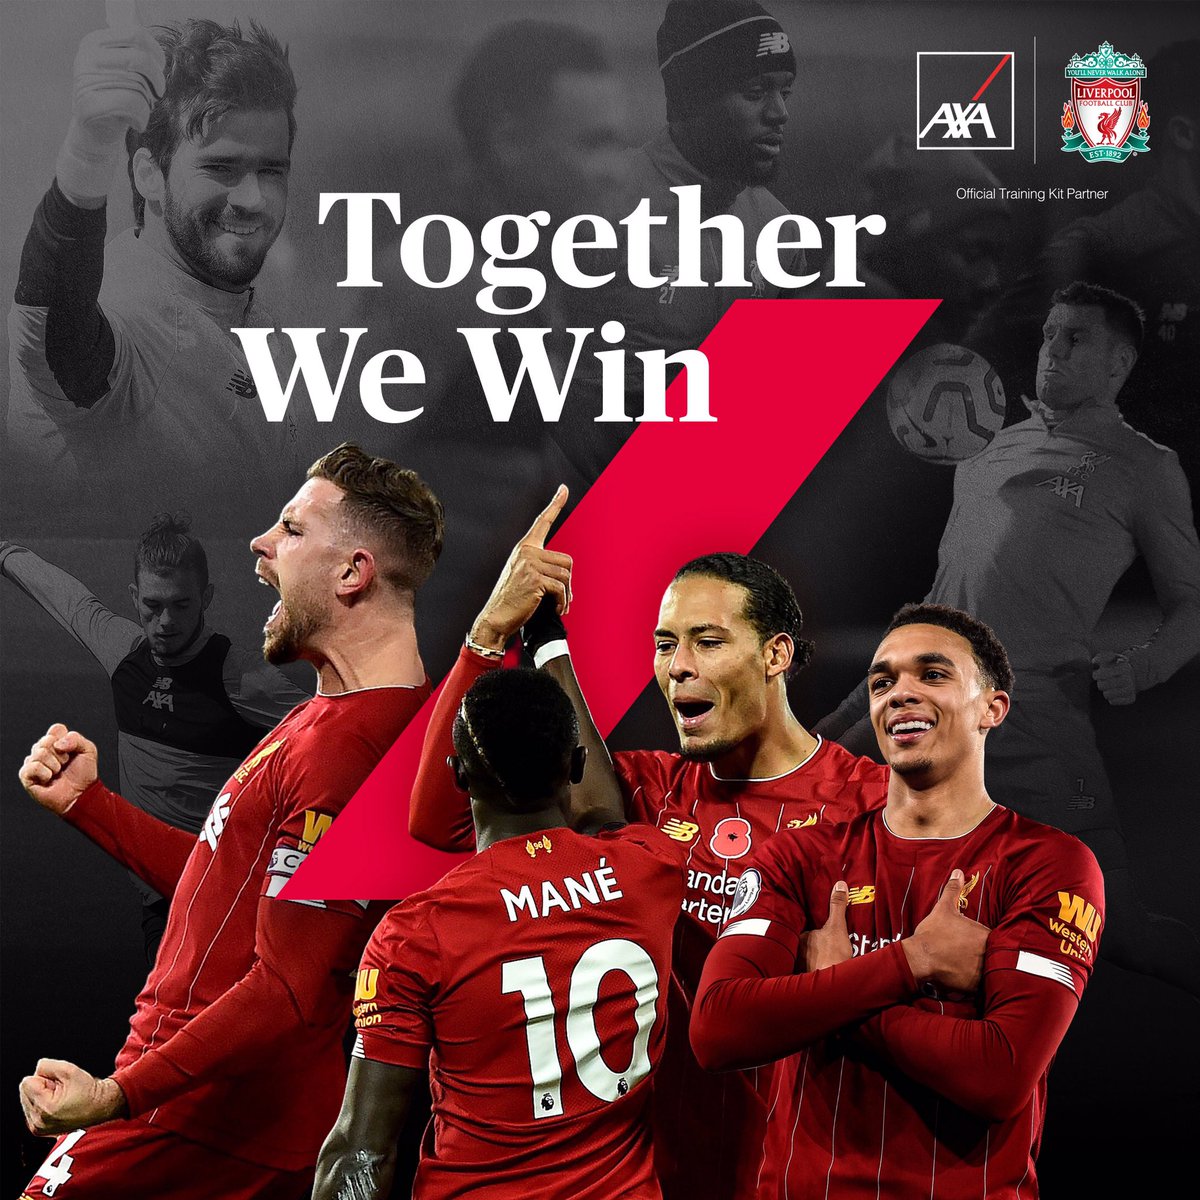 Premier League Champions! 🏆 These are the moments you train for. Congratulations to the millions of fans, the players, management and backroom team who make up @LFC Together we win. #StaySafe #KnowYouCan #AXA #OfficialTrainingKitPartner #LFC